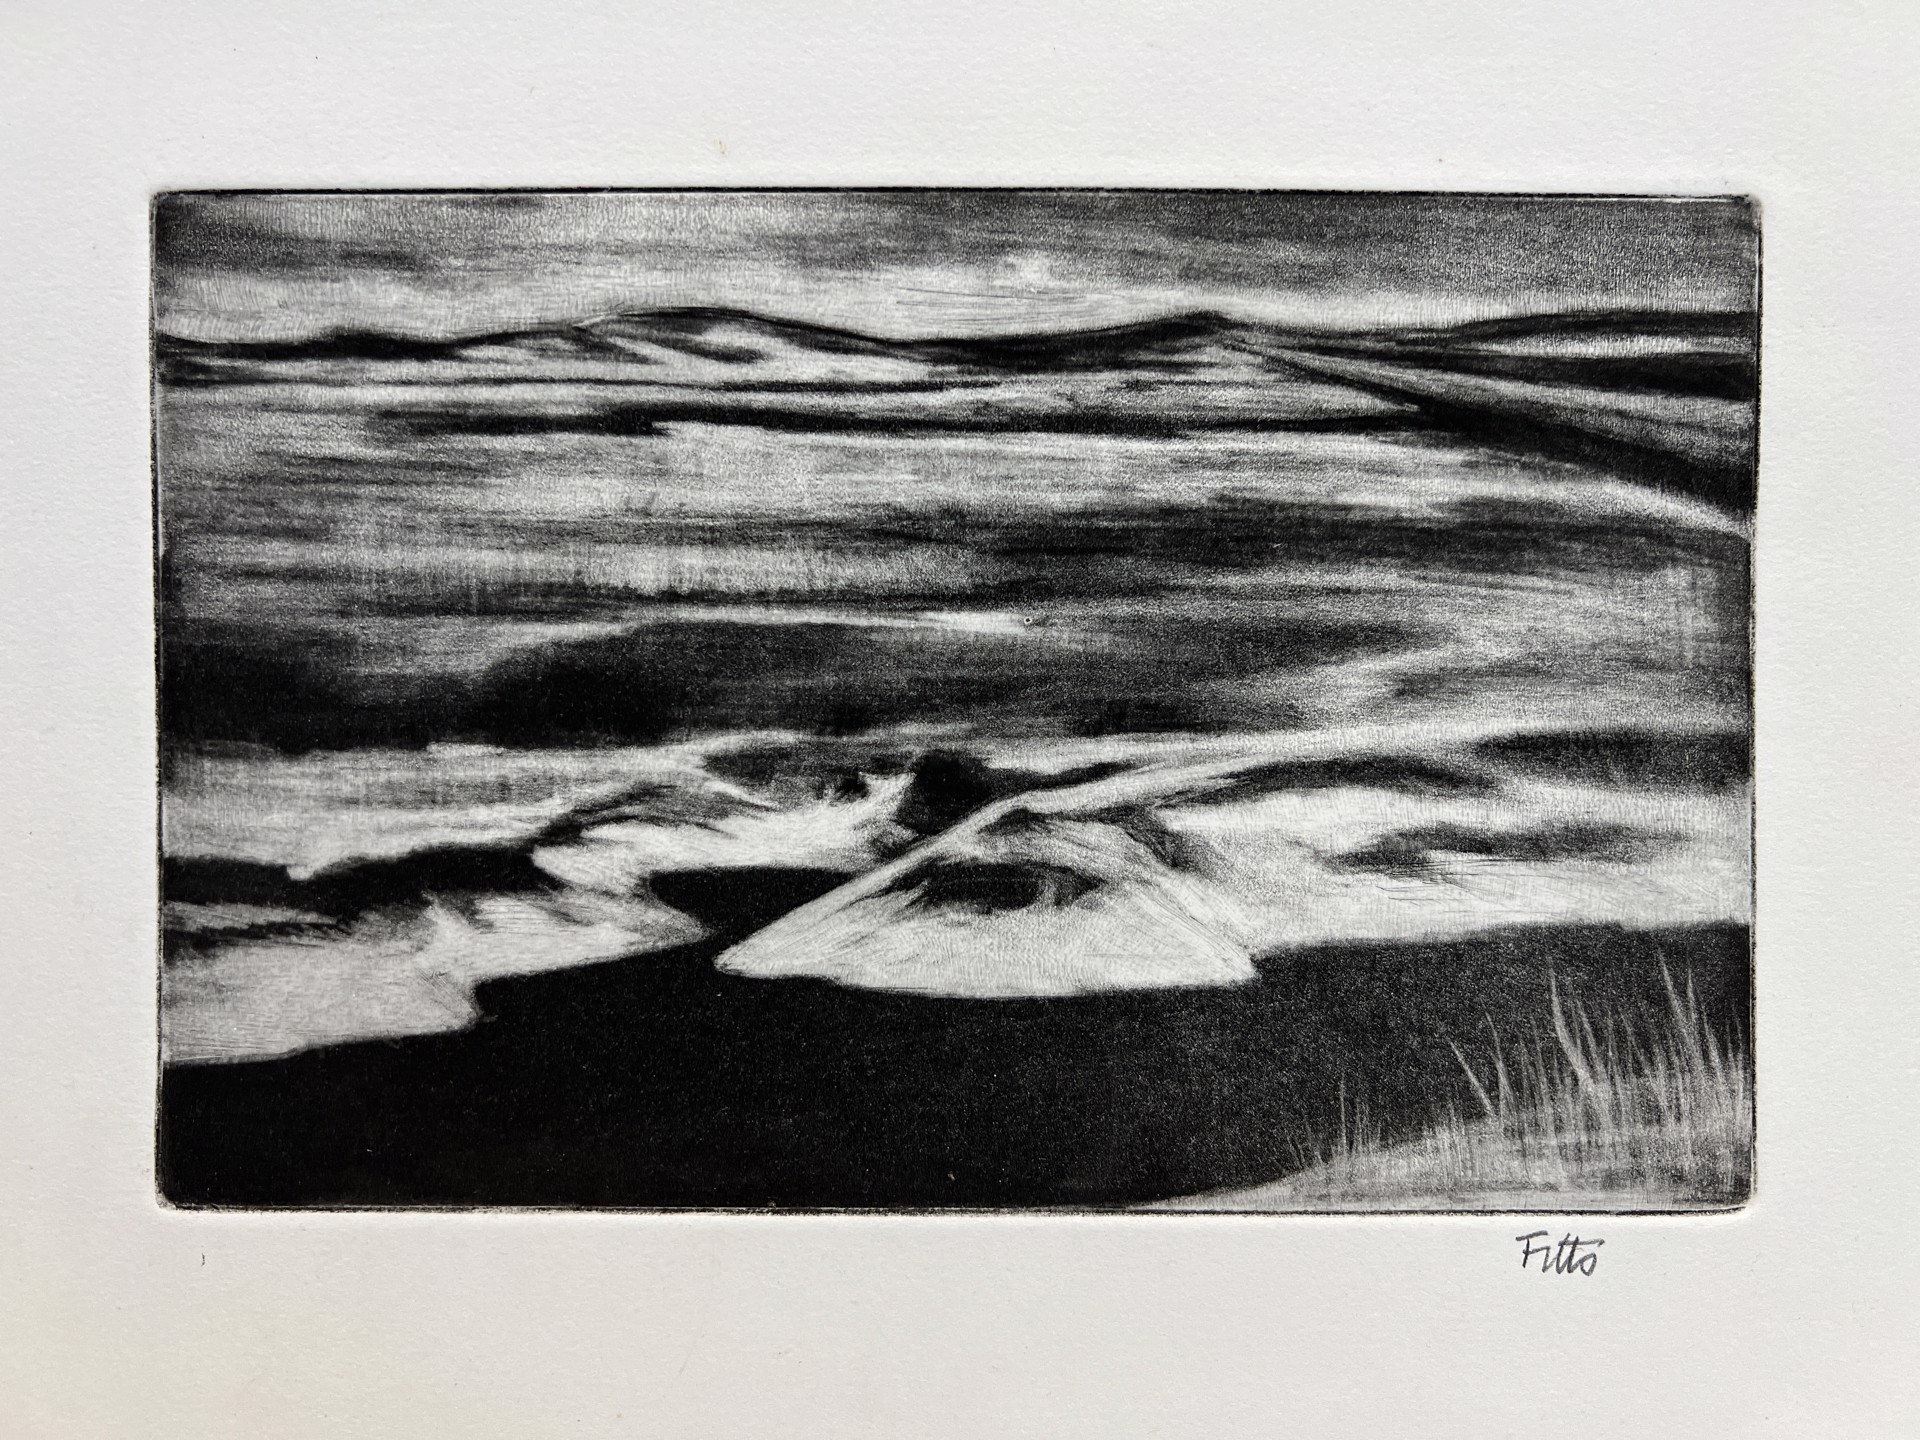 Black and White Dunescape, A.P. by William S. Fitts